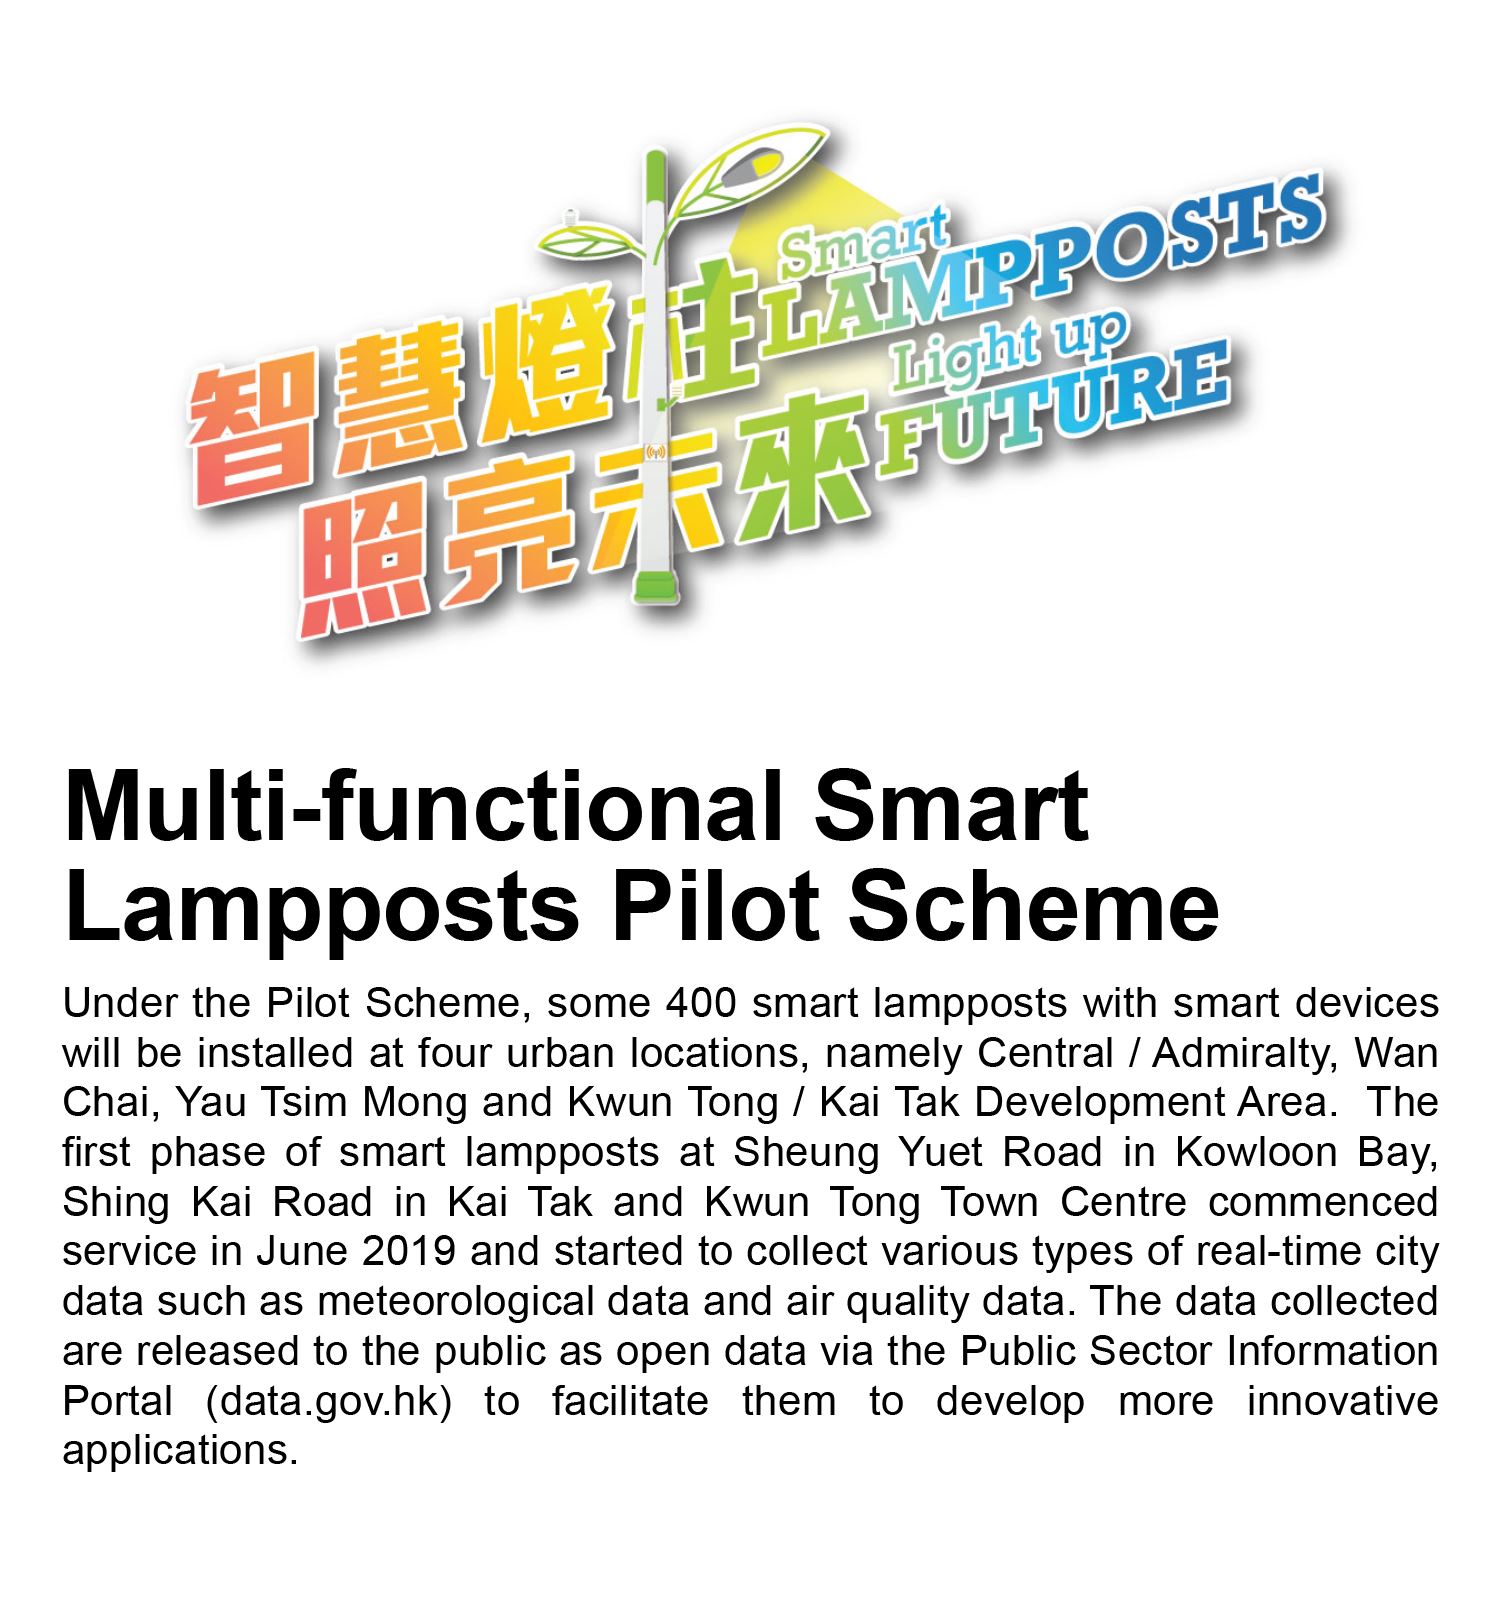 Multi-functional Smart Lampposts Pilot Scheme, 
				Under the Pilot Scheme, some 400 smart lampposts with smart devices will be installed at four urban locations, namely Central / Admiralty, Wan Chai, Yau Tsim Mong and Kwun Tong / Kai Tak Development Area.  The first phase of smart lampposts at Sheung Yuet Road in Kowloon Bay, Shing Kai Road in Kai Tak and Kwun Tong Town Centre commenced service in June 2019 and started to collect various types of real-time city data such as meteorological data and air quality data.  The data collected are released to the public as open data via the Public Sector Information Portal (data.gov.hk) to facilitate them to develop more innovative applications.